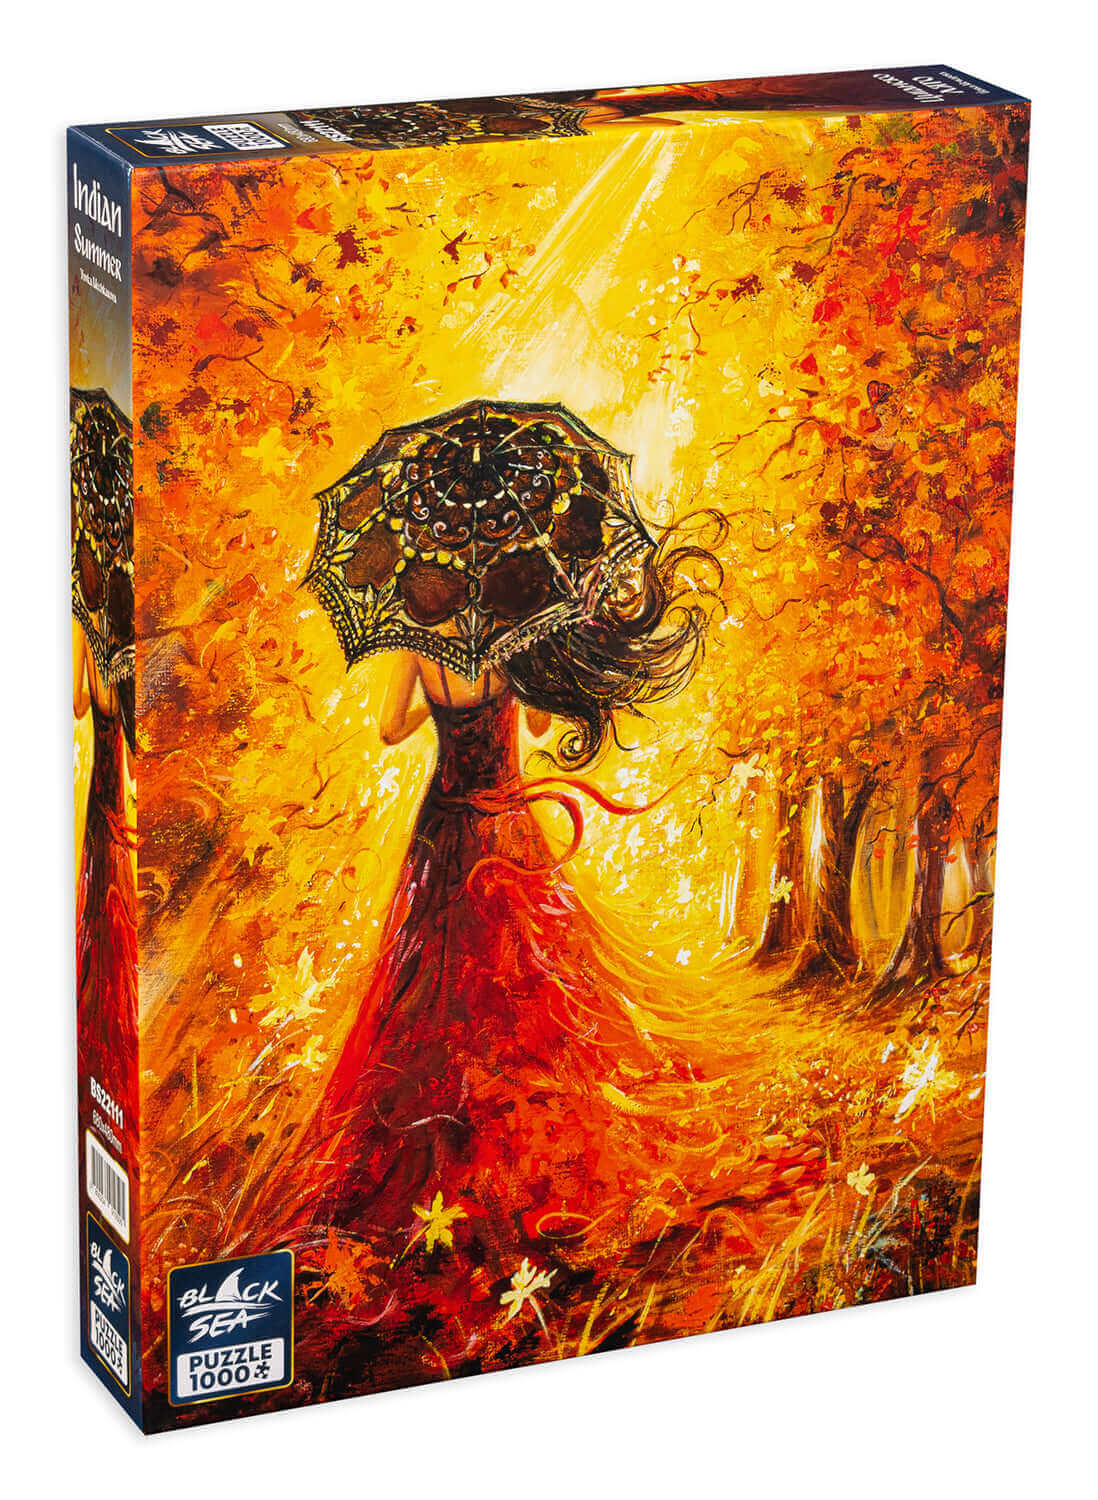 Puzzle Black Sea 1000 pieces - Indian Summer, The sun still warms up the land, and the beautiful dress of autumn makes it lovelier than ever. Red, yellow, orange – the colours of nature abound and turn the world into a fairy-tale that you cannot stop read